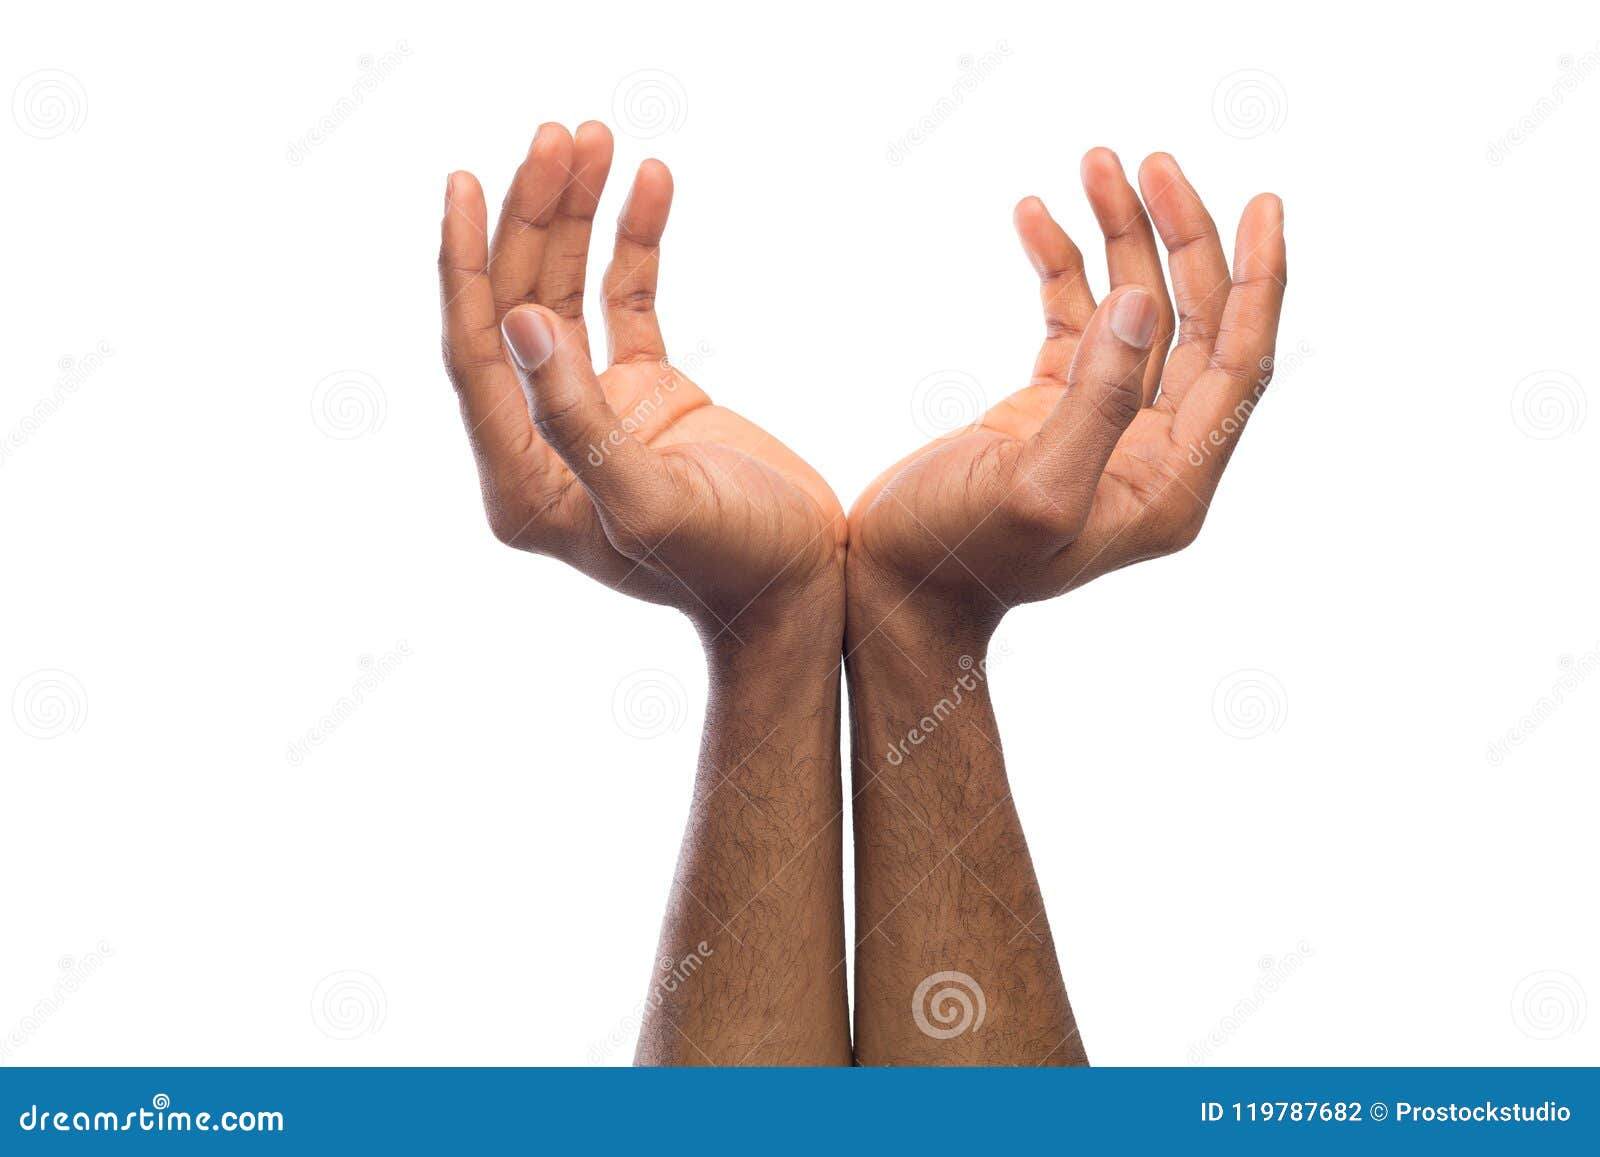 Black Male Hands Cupped At White Isolated Background Stock Photo